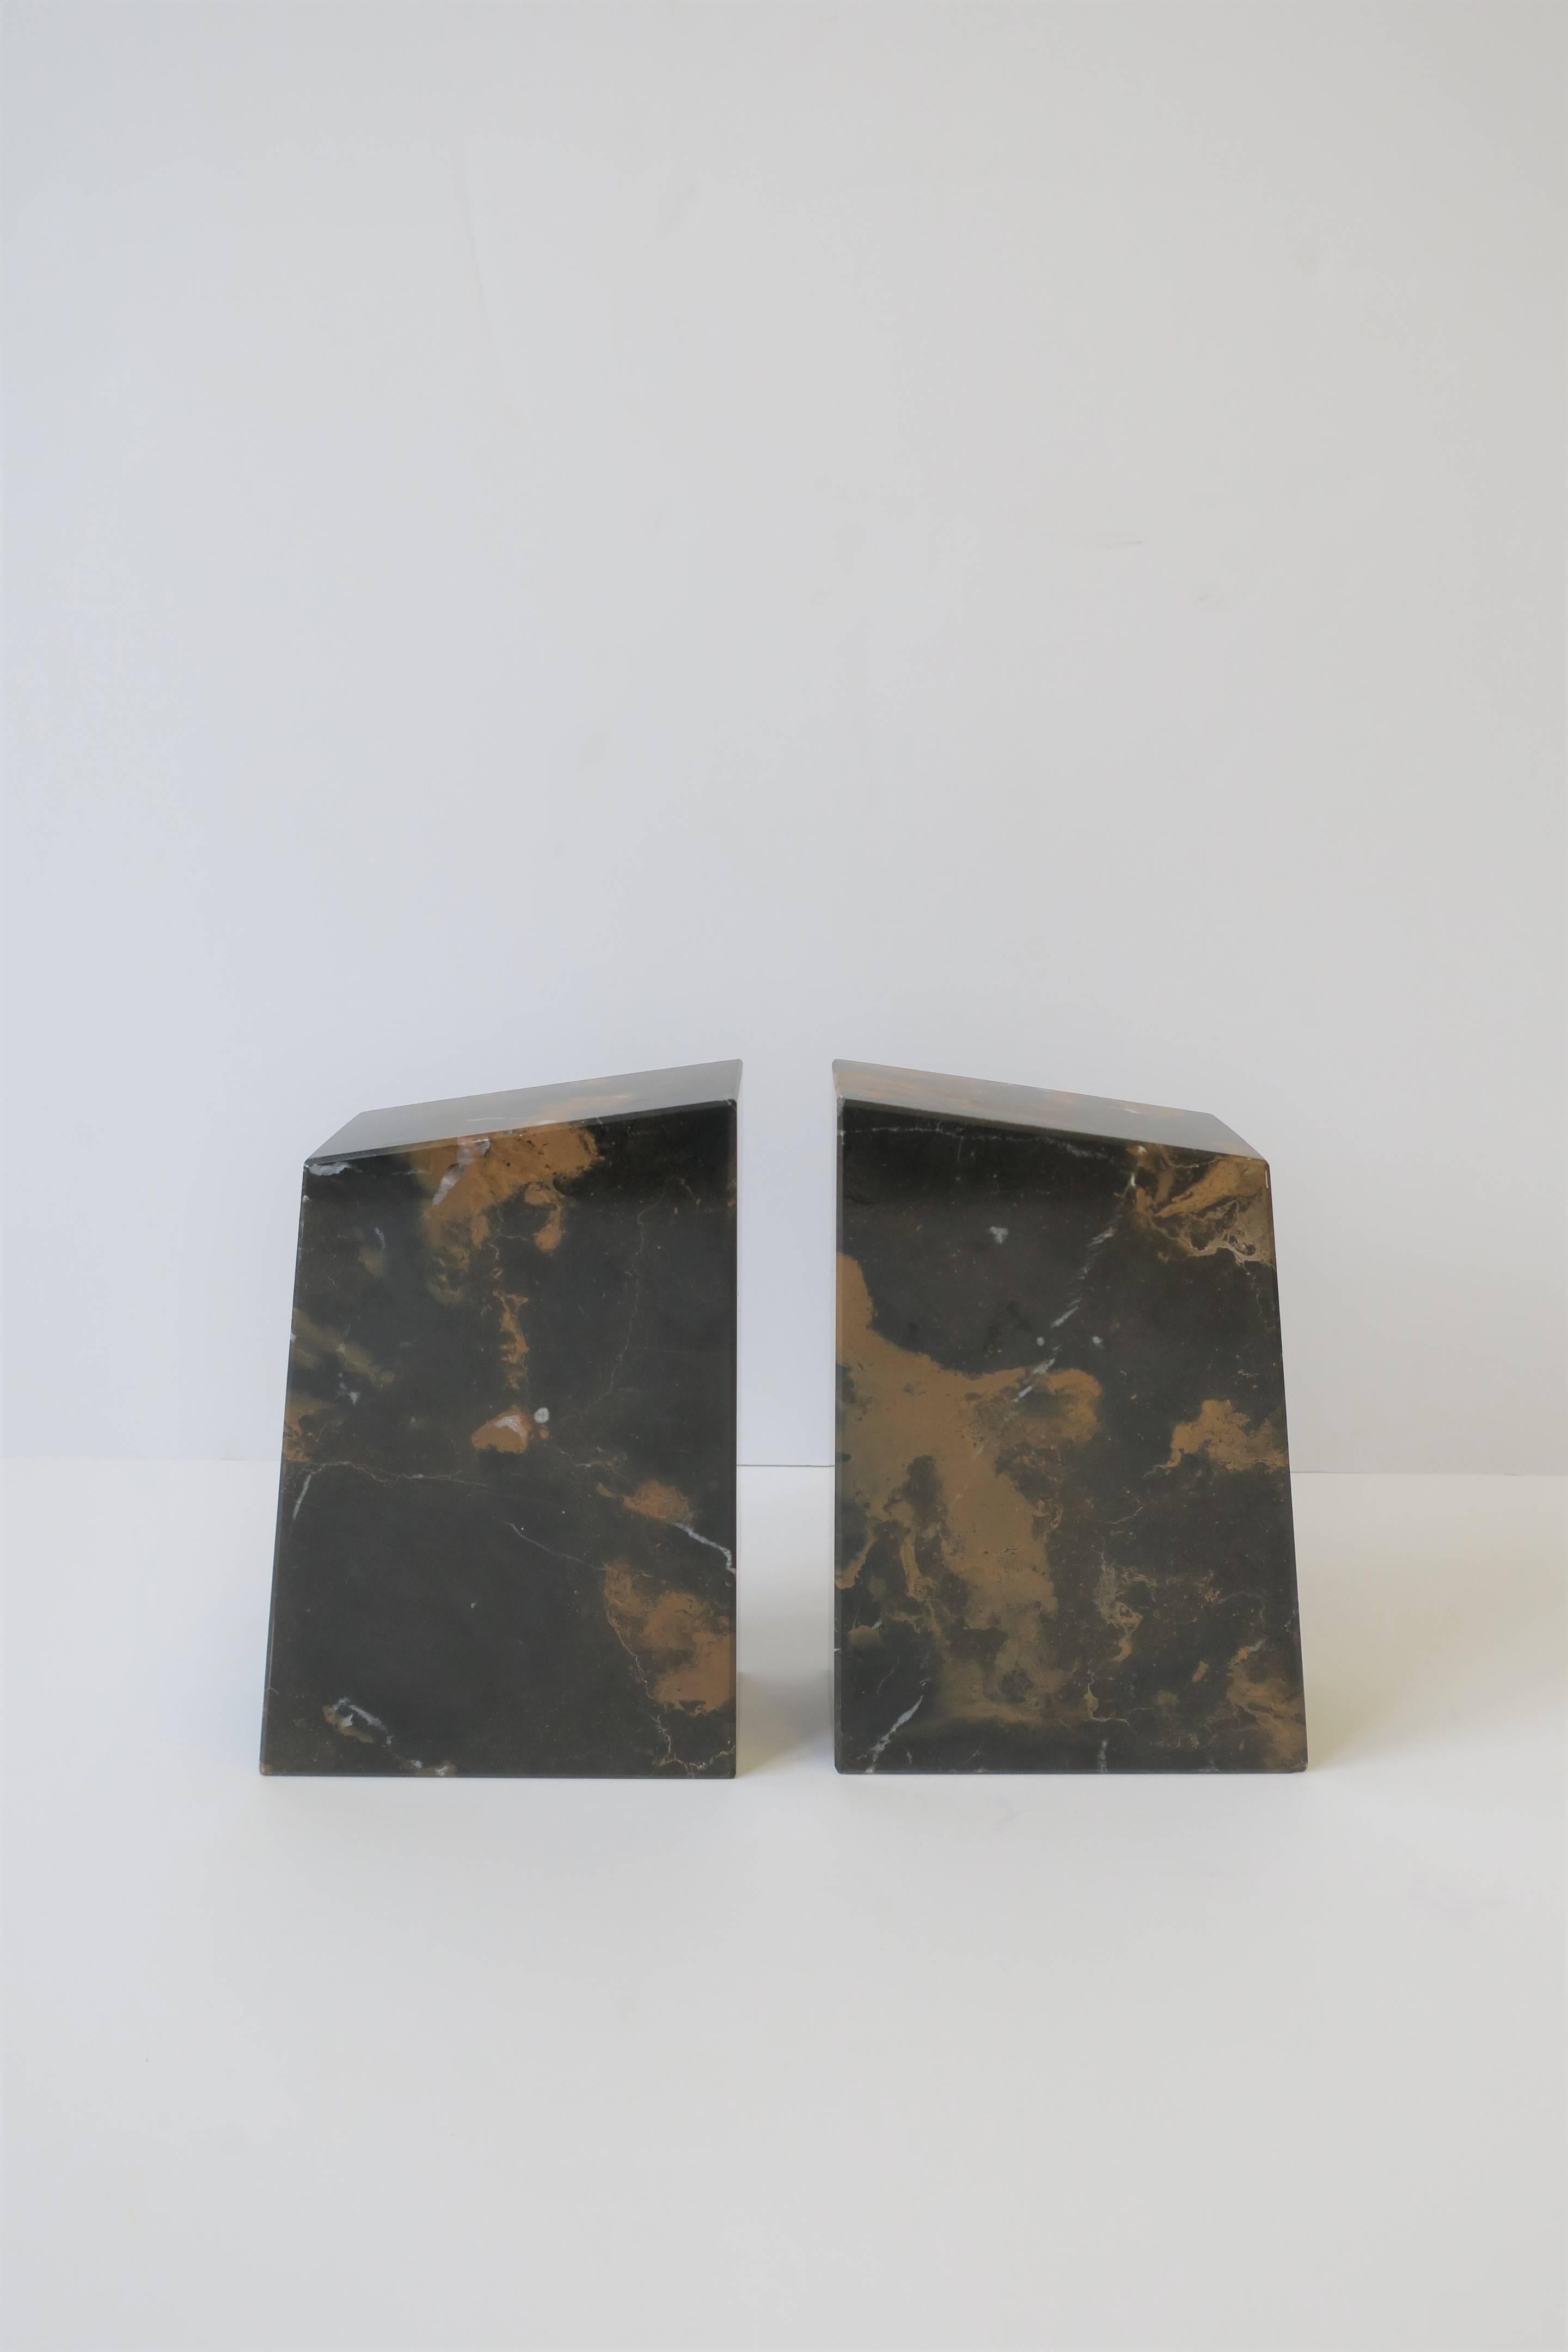 A pair of substantial marble bookends in the Modern style. Colors include dark and light brown with traces of white. Each measure: 2